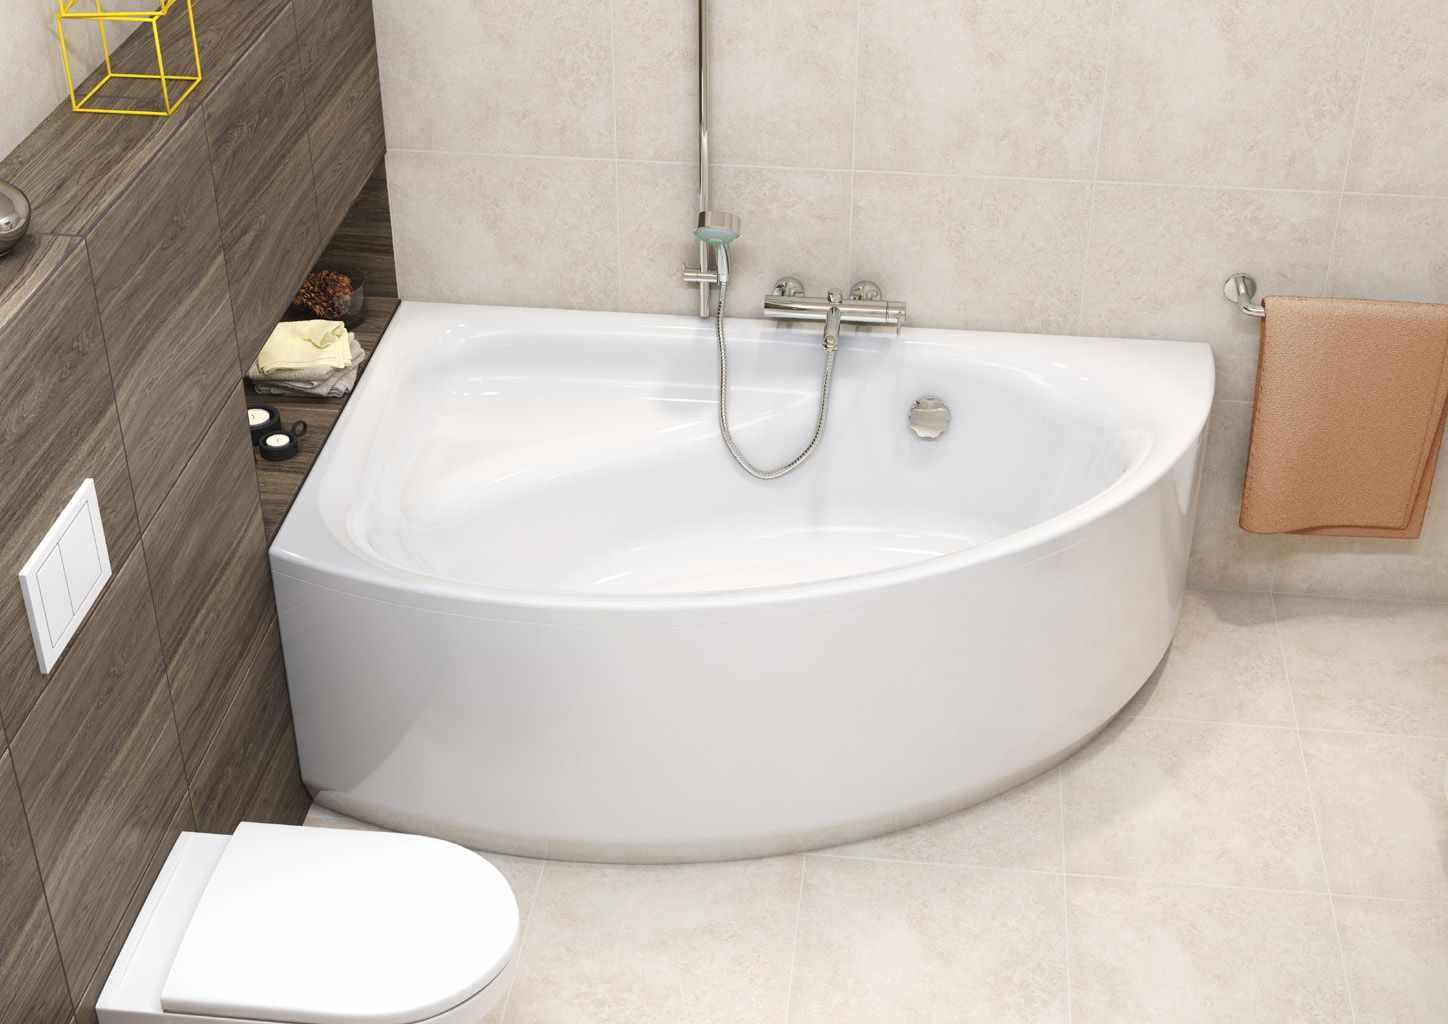 An example of a bright style bathroom with a corner bath